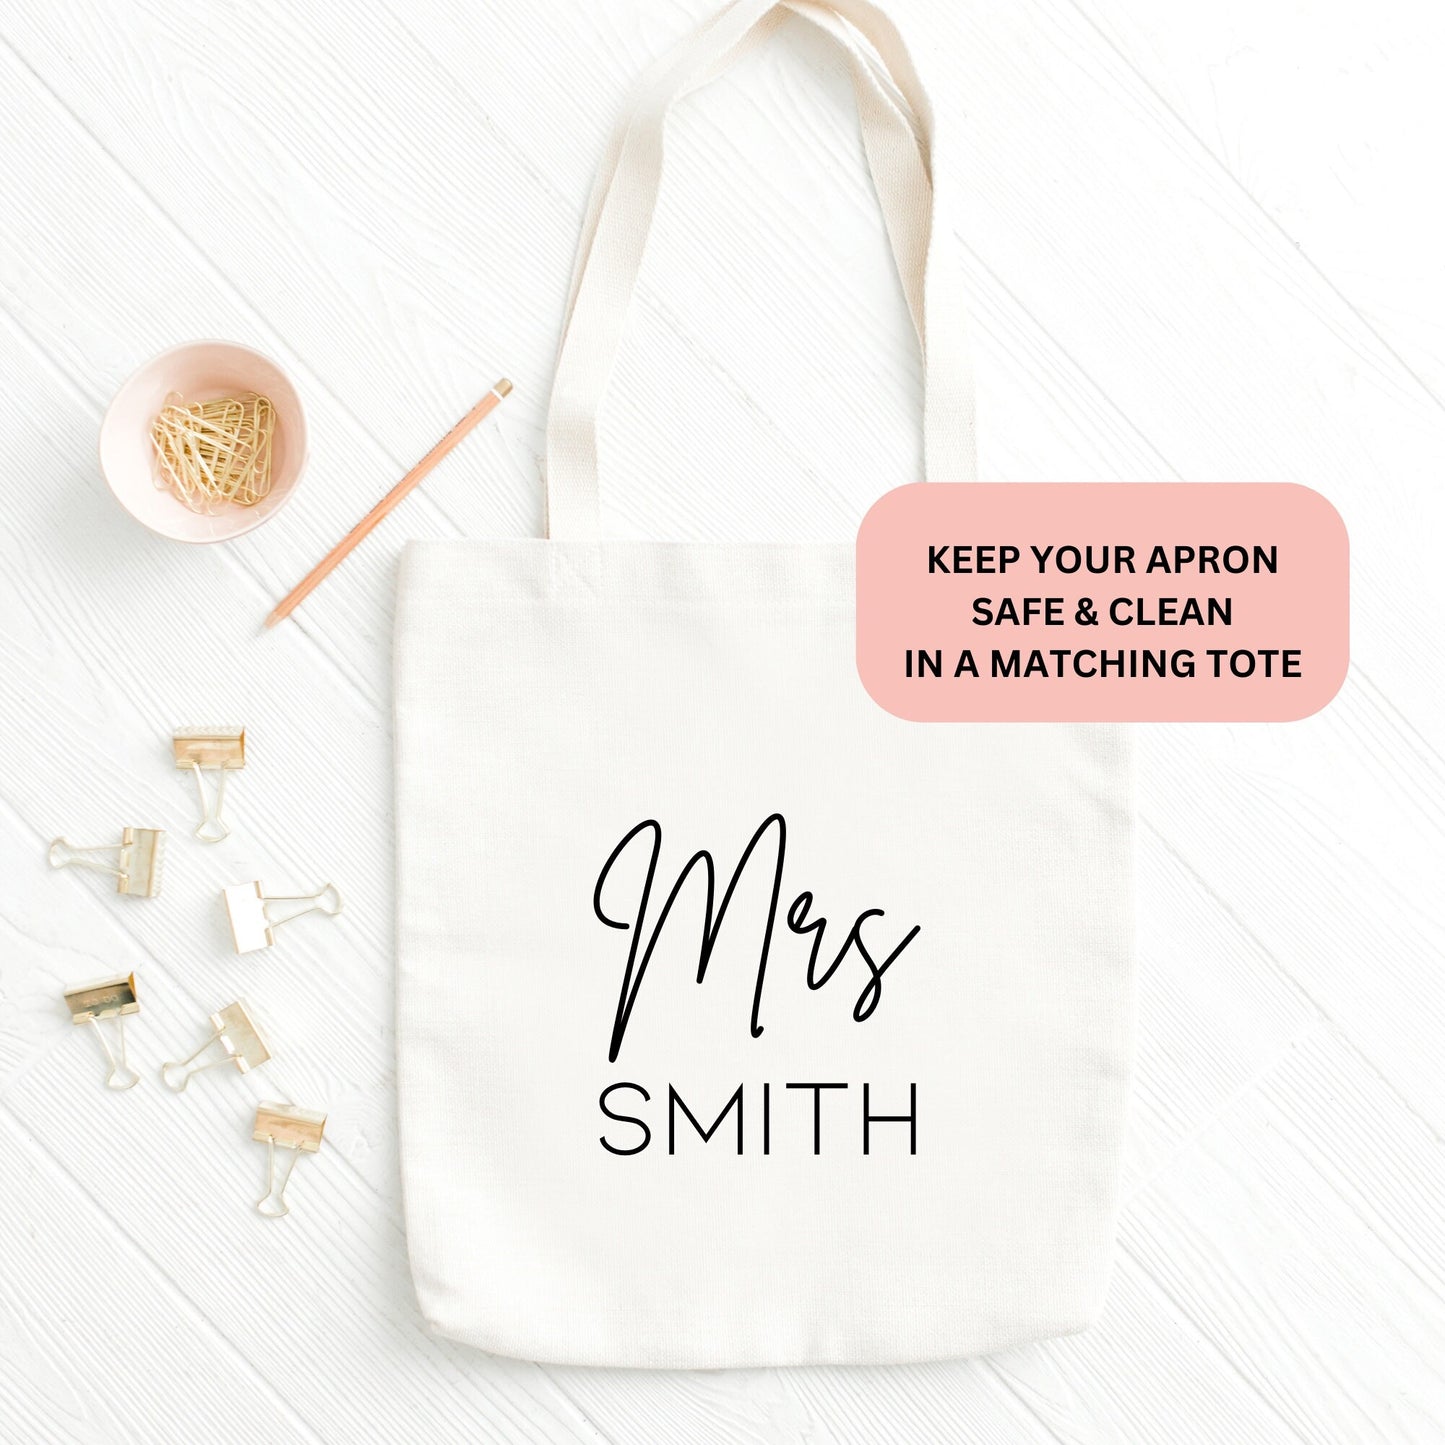 Wedding Day Apron, Personalised White Apron for Bride, Apron for First meal as Mr & Mrs, Wedding Dress Cover and Matching Tote Bag